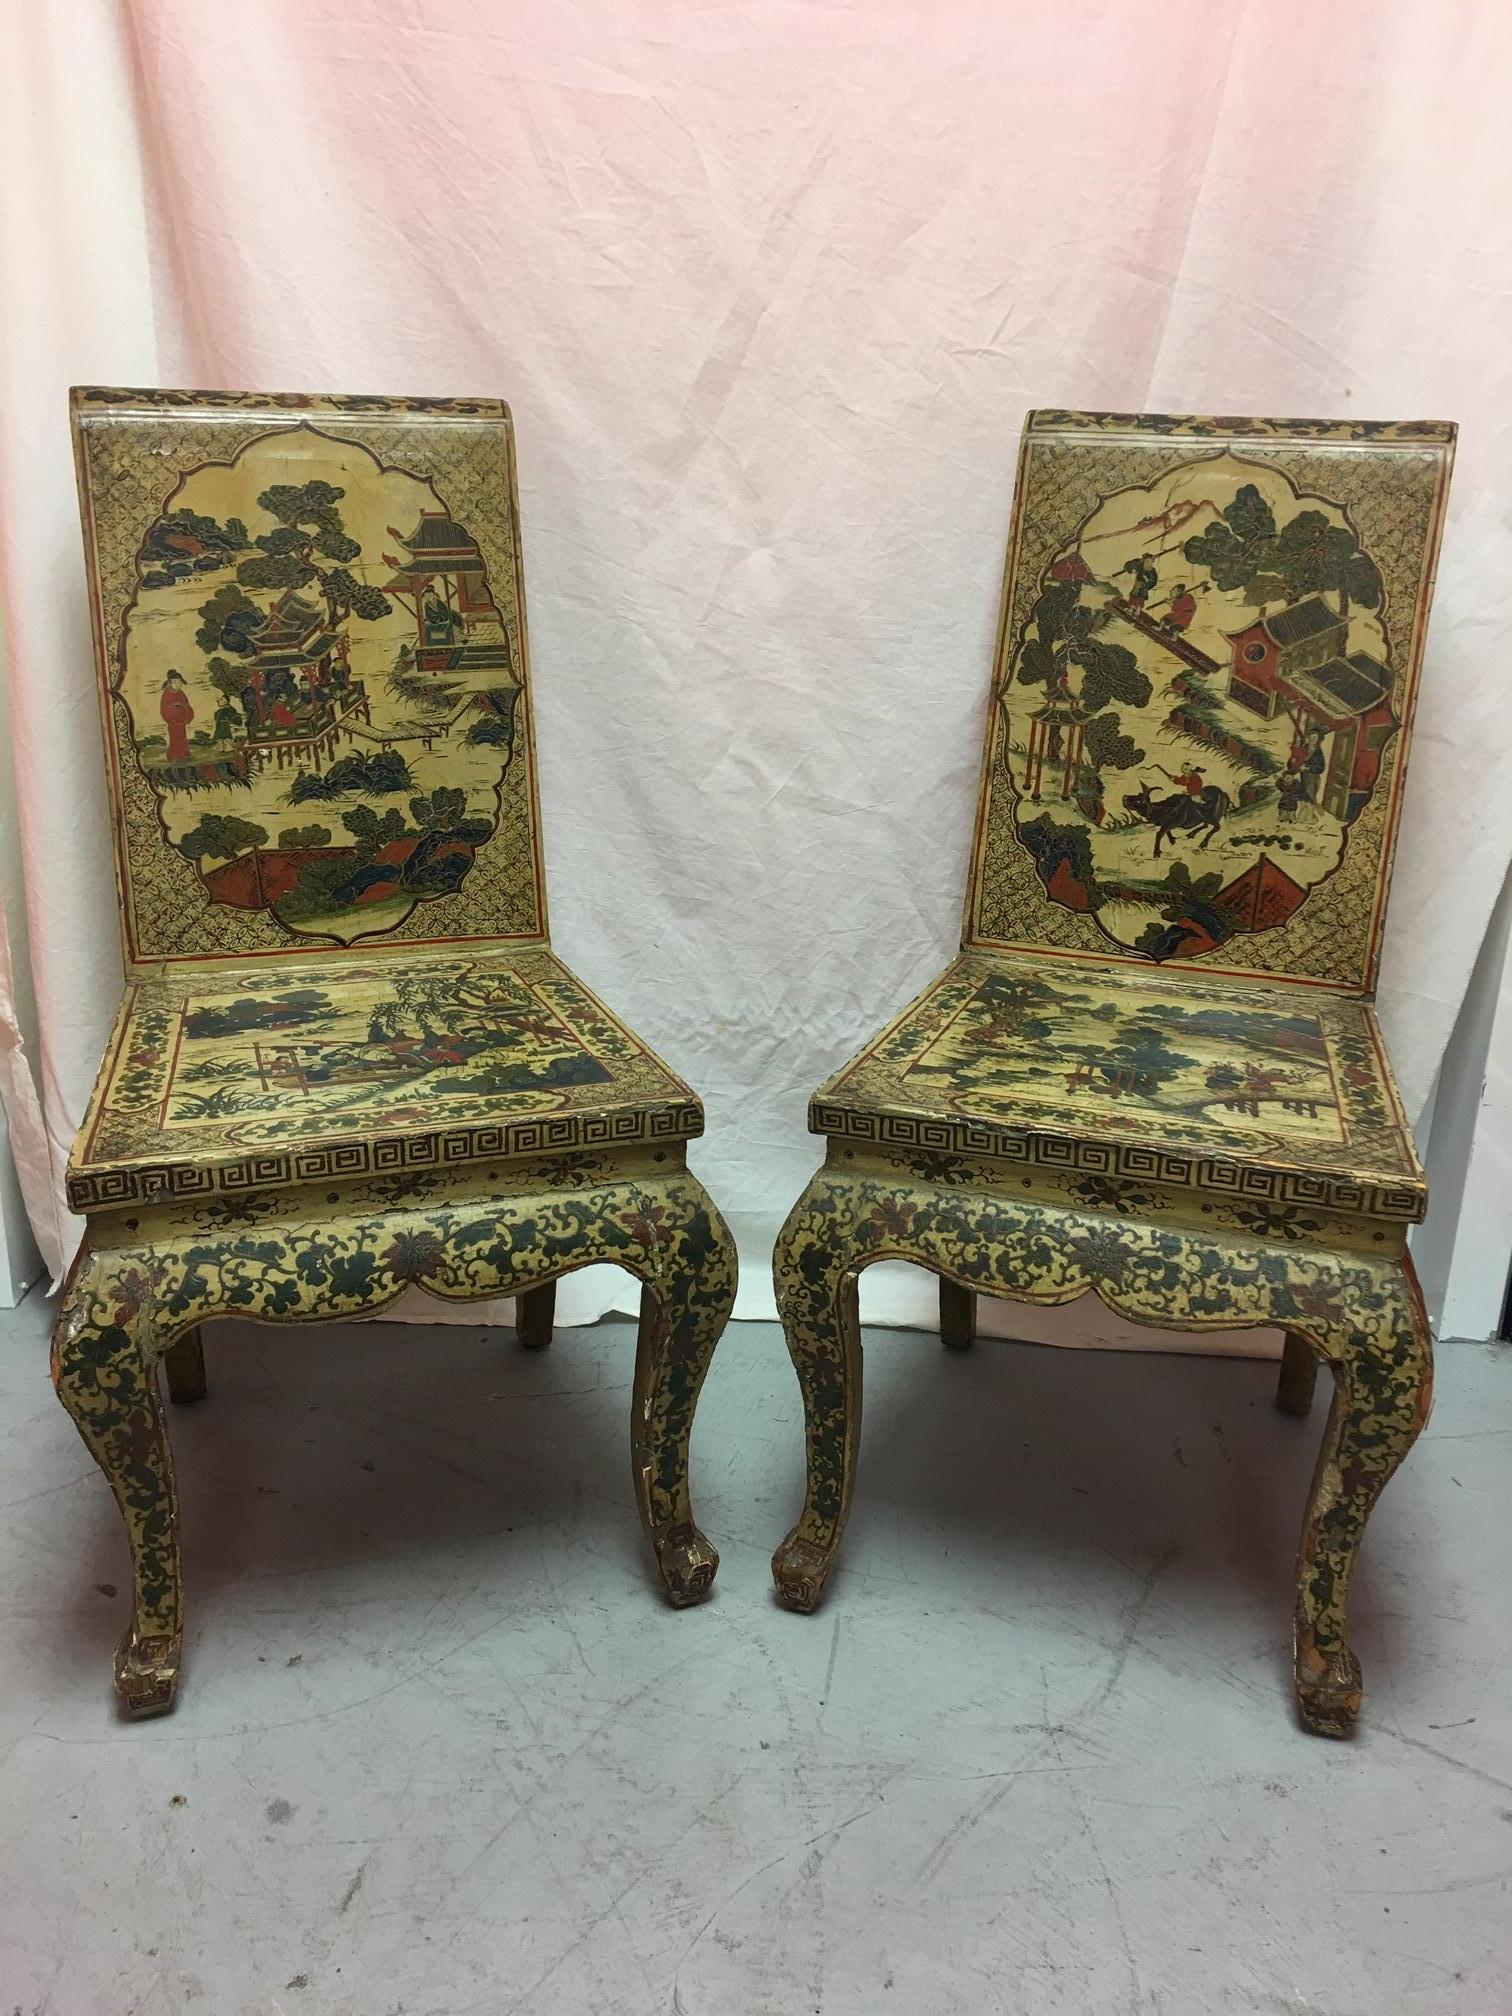 Pair of japanned or chinoiserie painted Chinese chairs, circa 1940.